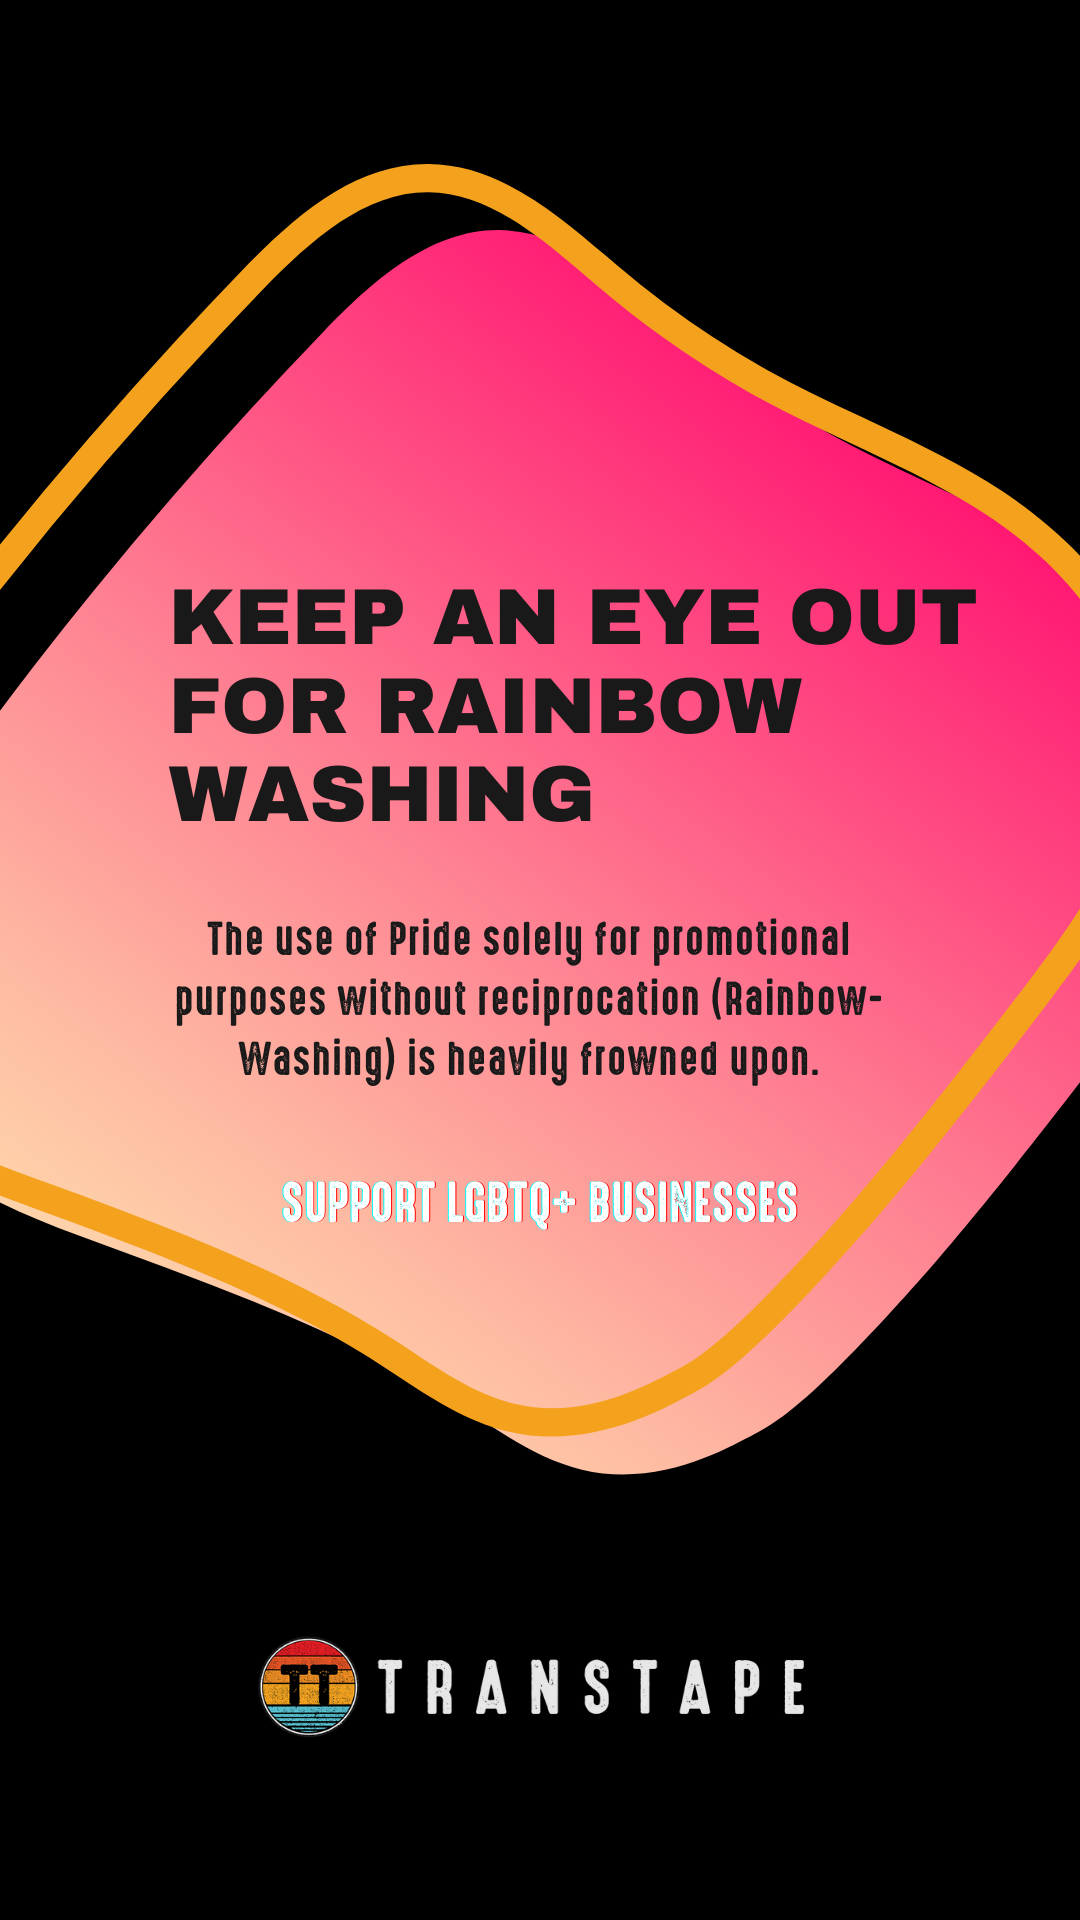  FOR RAINBC WASHING The use of Pride solely for promotional purposes without reciprocation Rainbow- Washing is heavily frowned upon. sis TRANSTAPE 